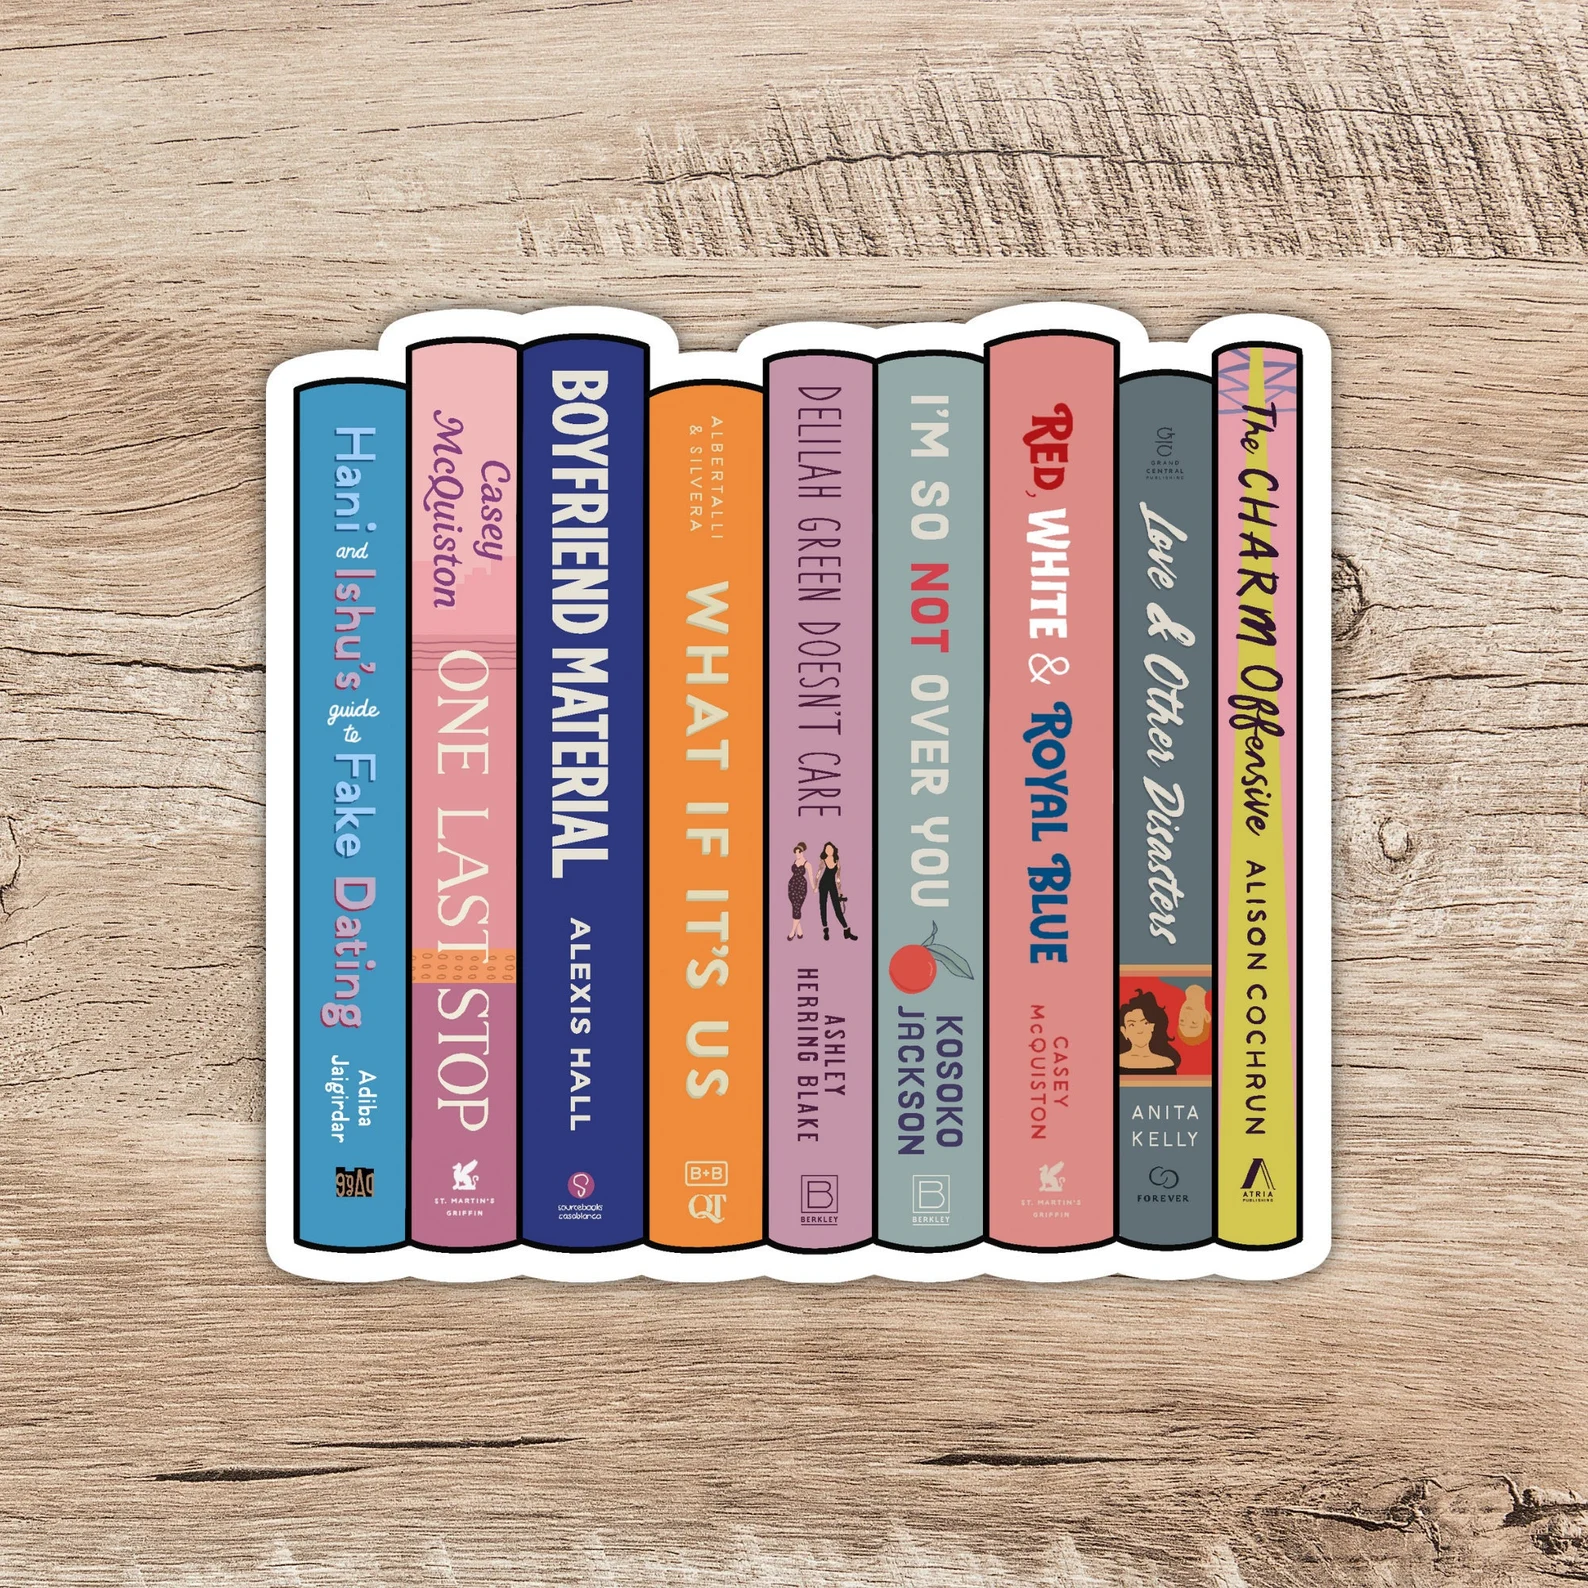 Image of a book stack featuring LGBTQ+ rom com book spines.